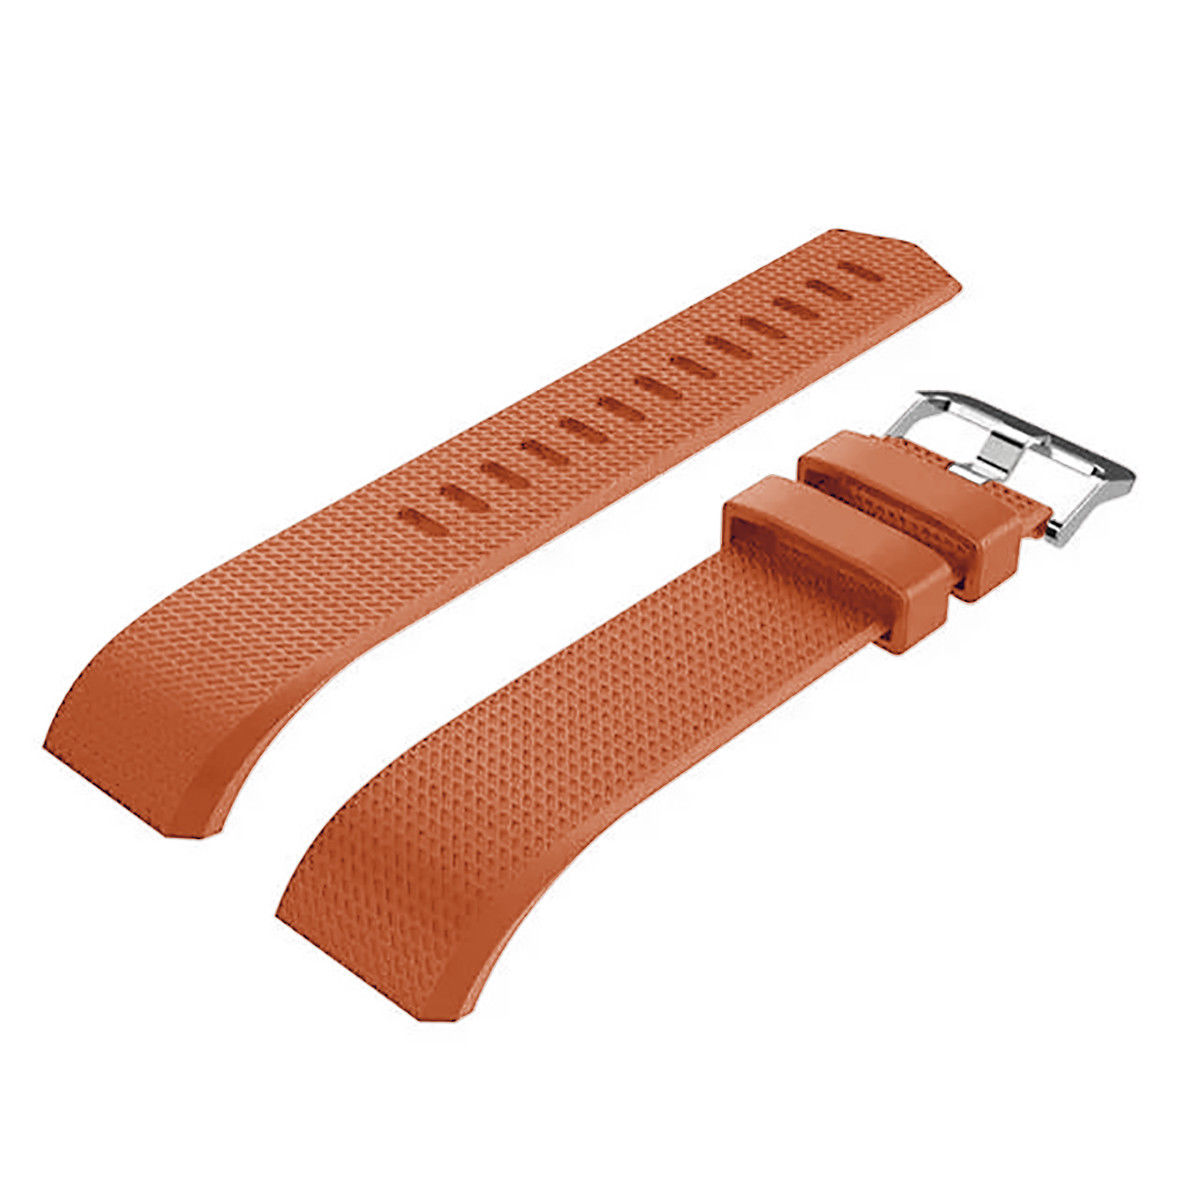 Fitbit Charge 2 Watch Bands, Mignova Soft Silicone Replacement Sport Watch Wrist Band Strap for Fitbit Charge 2 Fitness Tracker - Large Size (Brown) - image 5 of 5